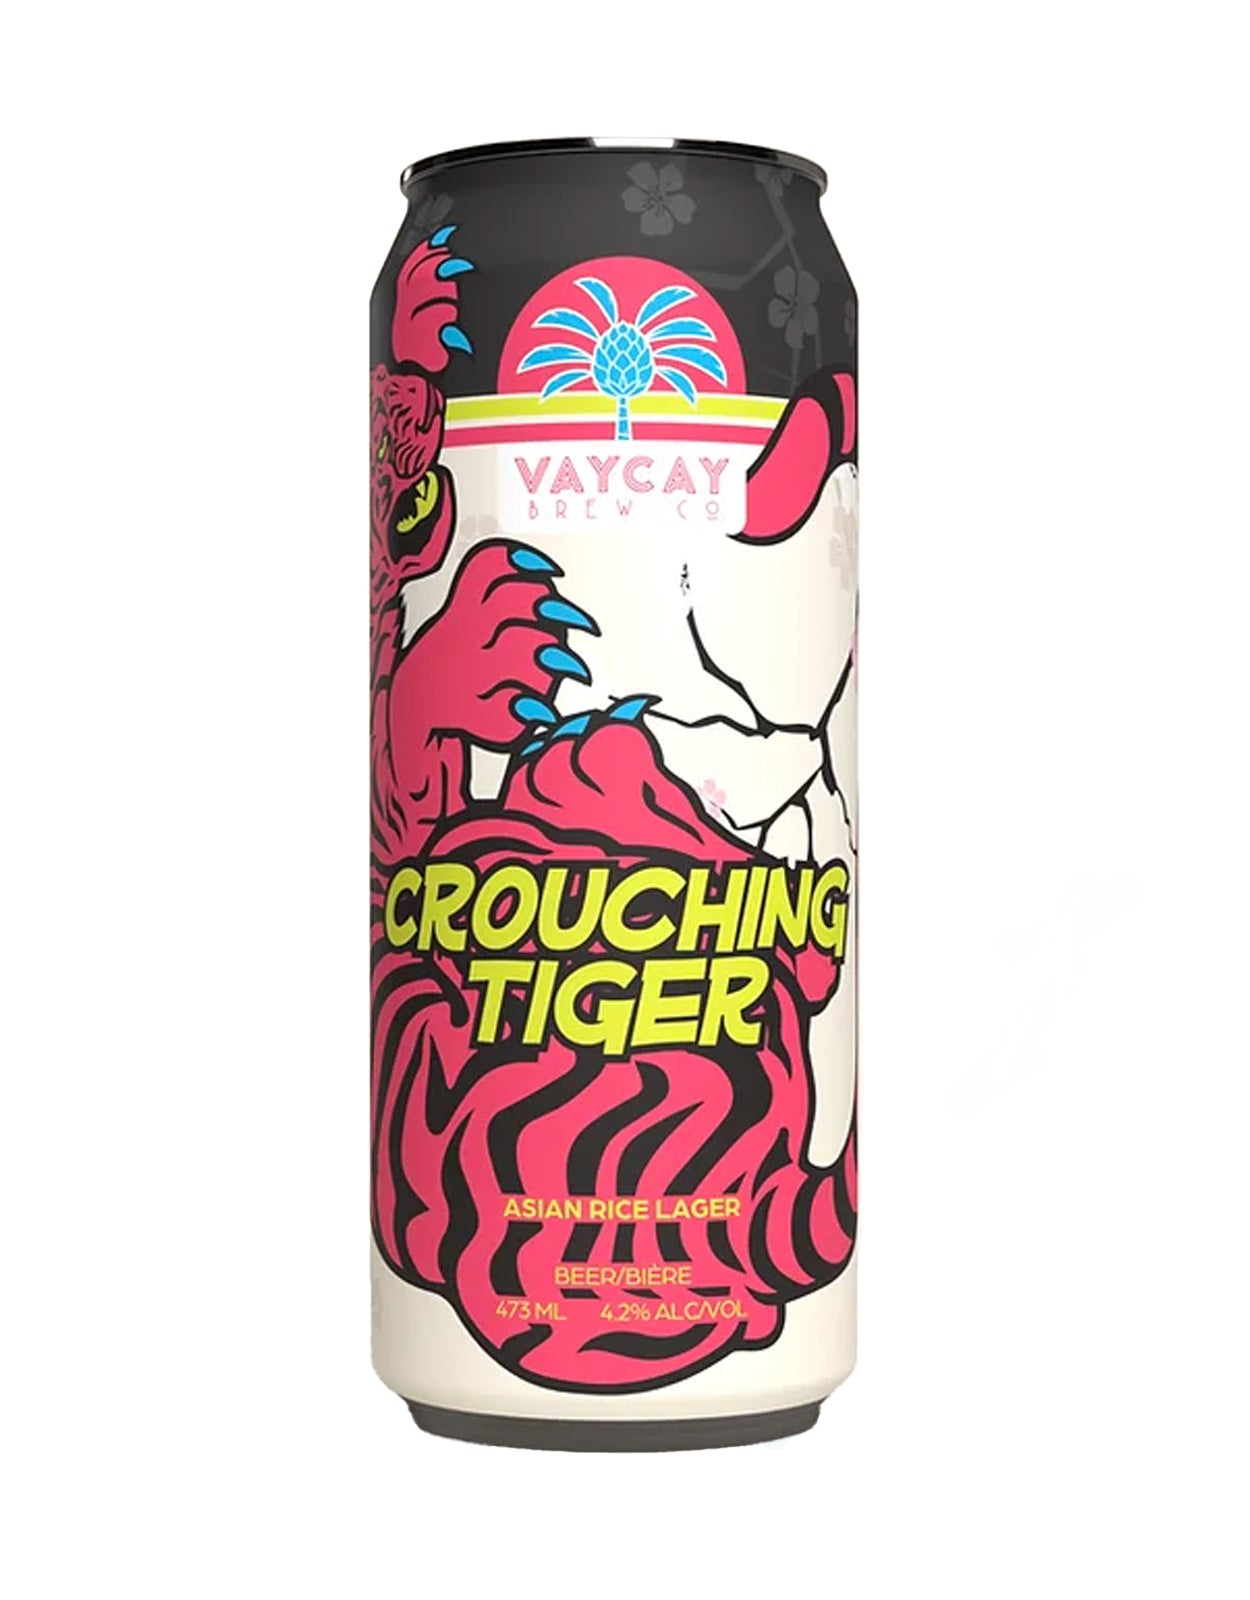 Vaycay Brew Crouching Tiger Rice Lager 473 ml - 4 Cans